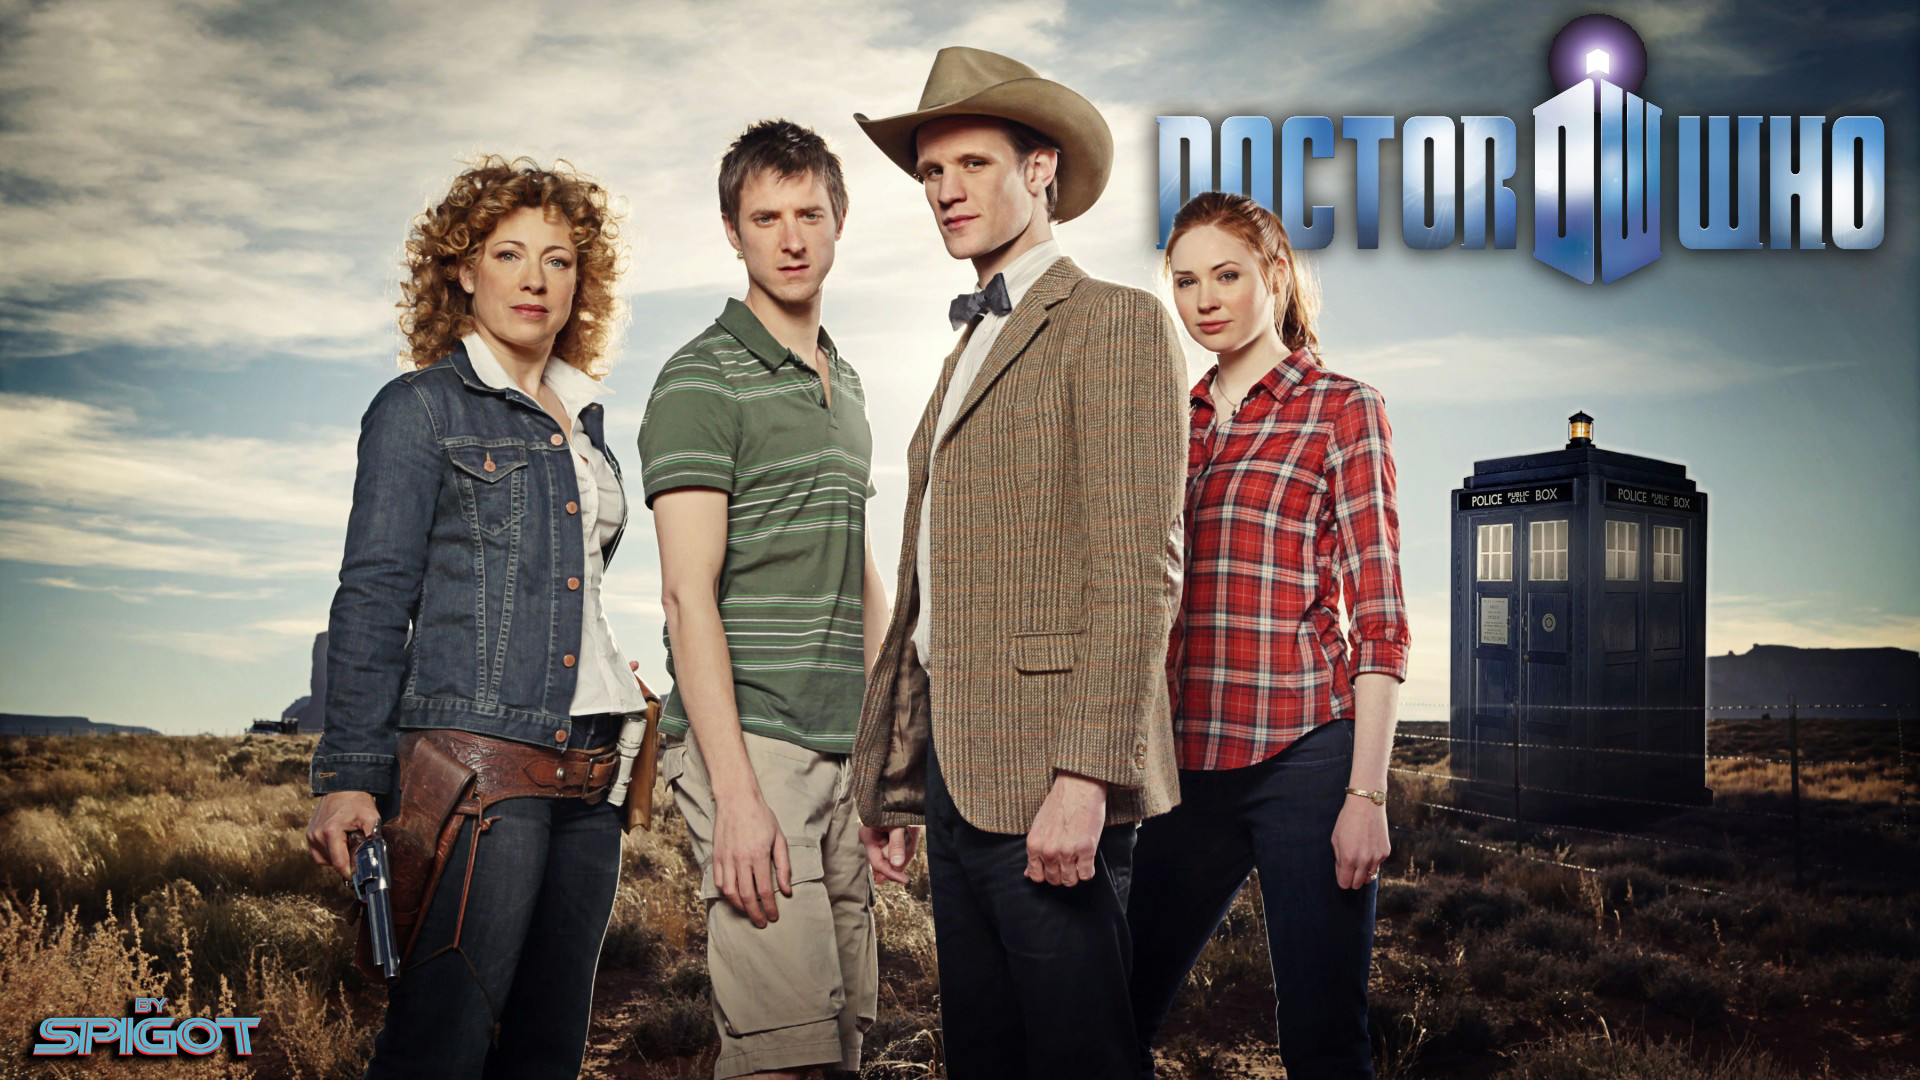 1920x1080 Dr who Wallpaper Series 6